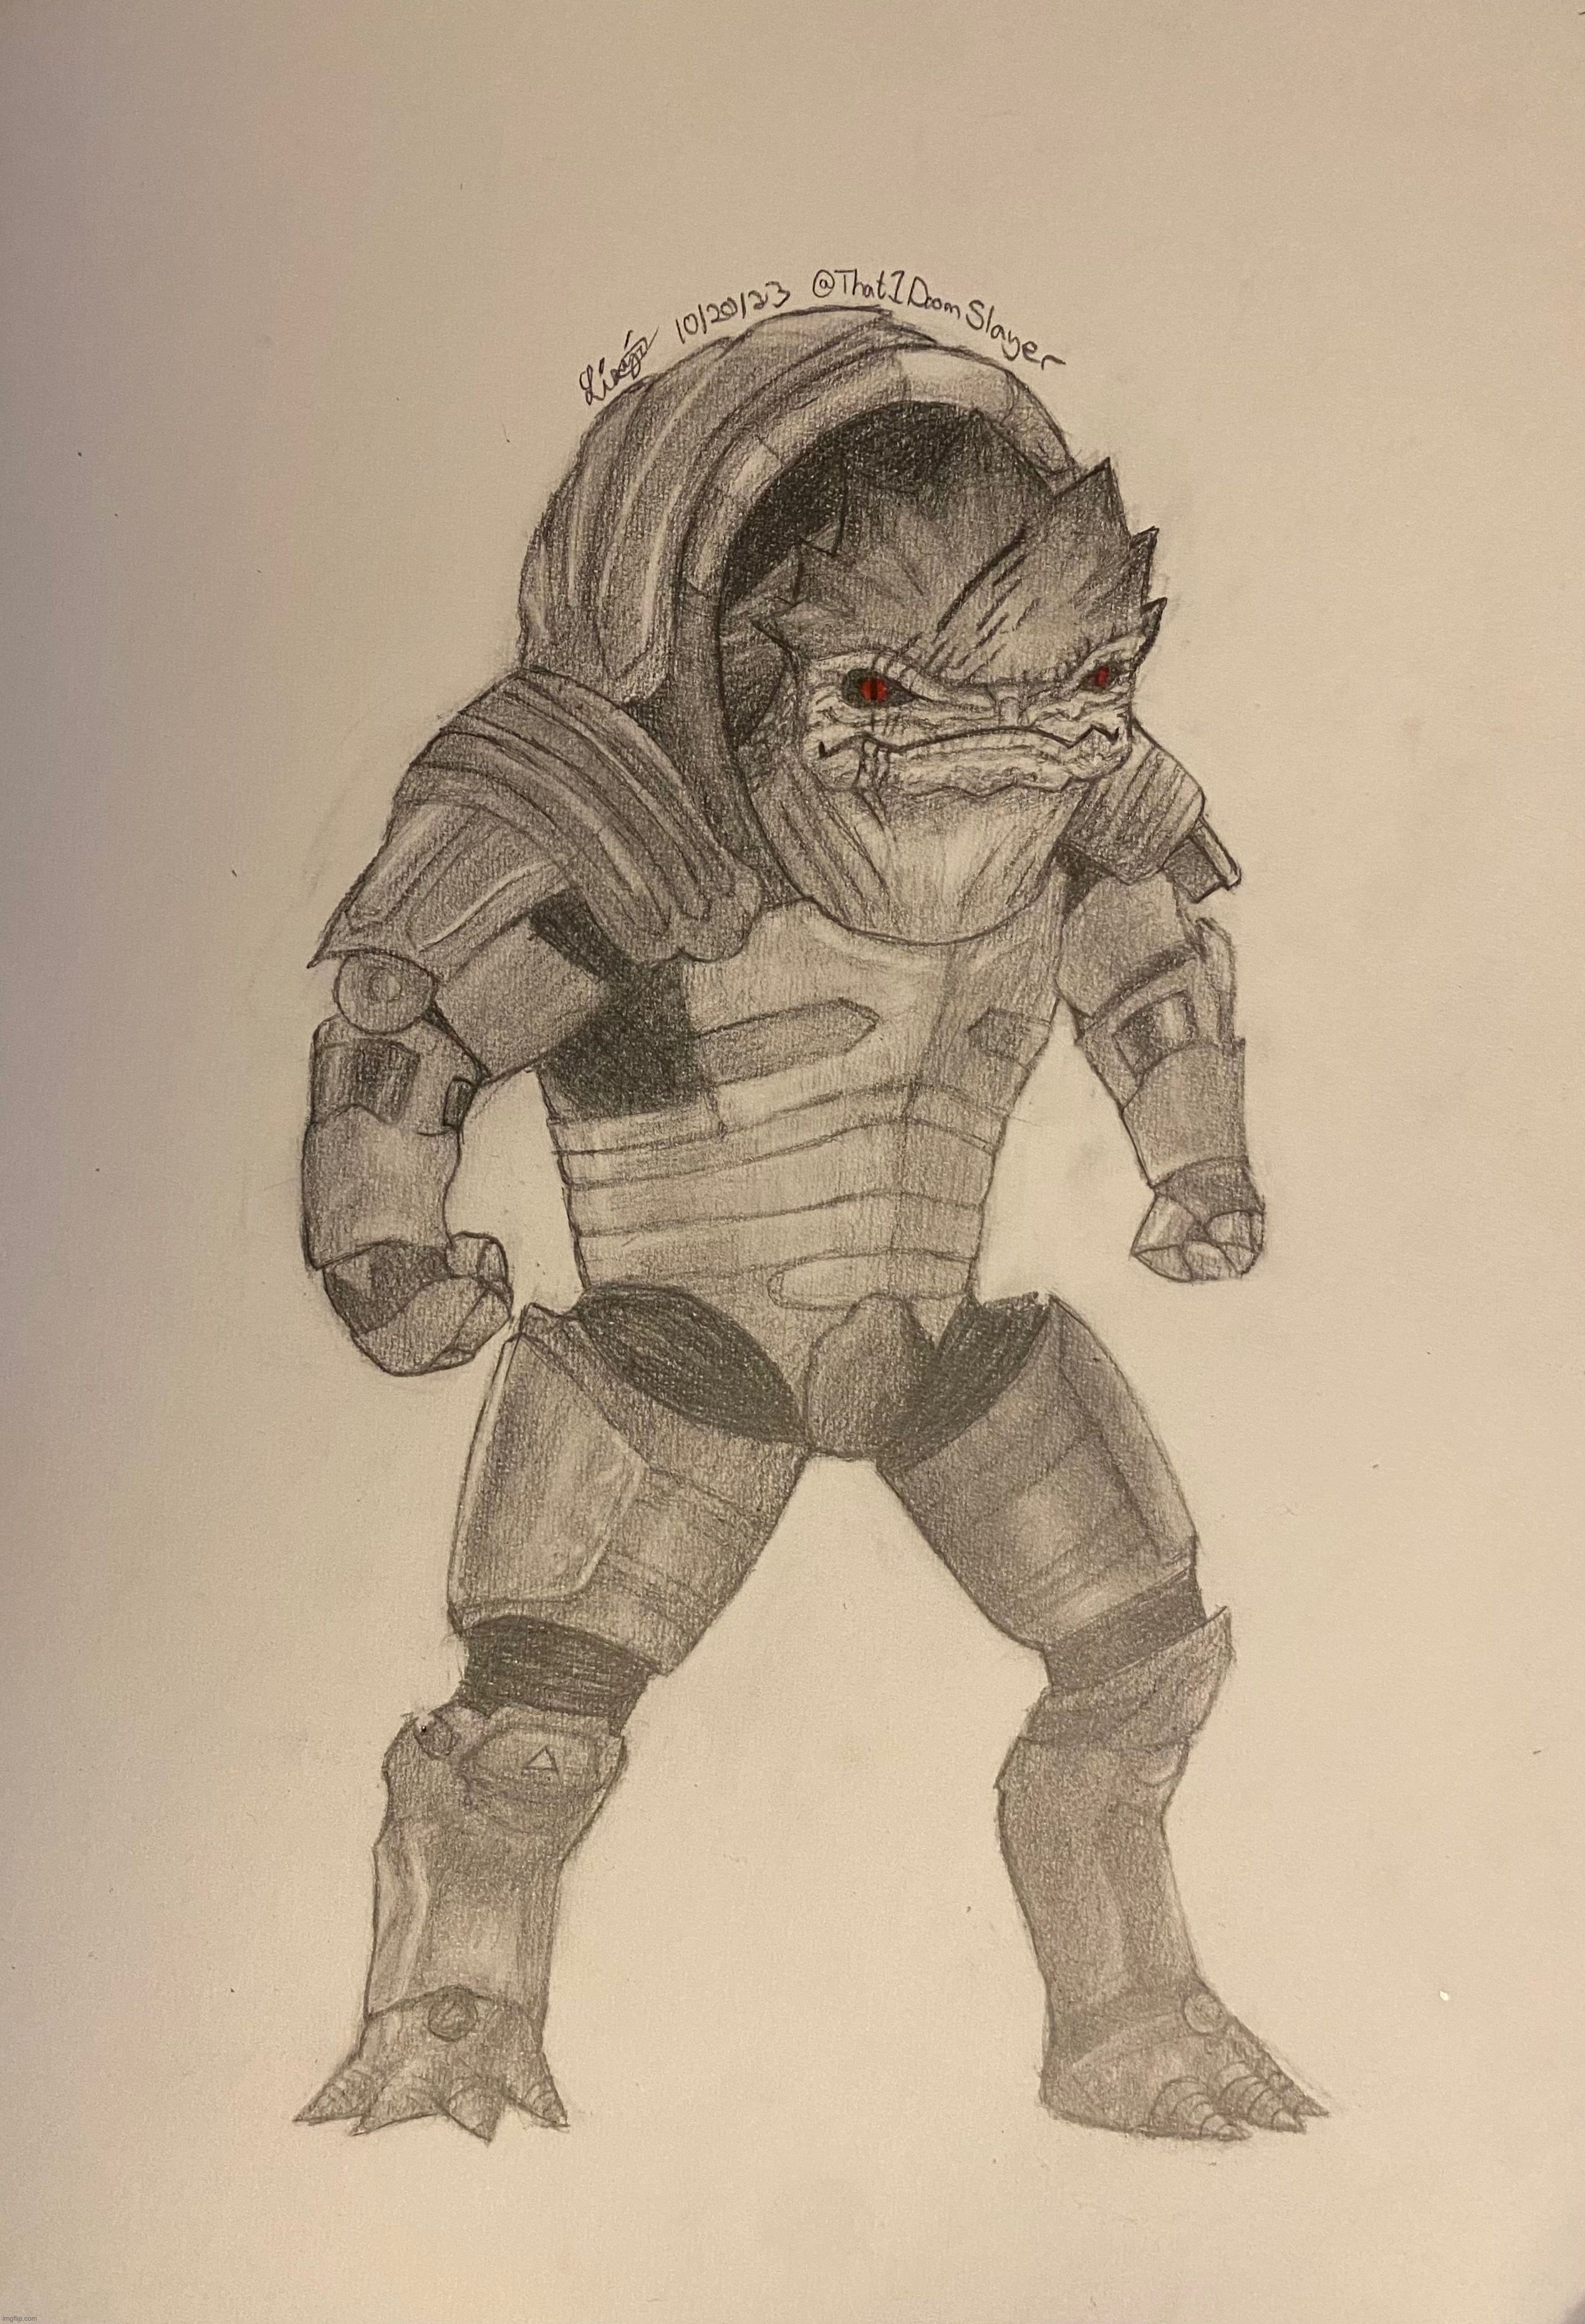 BEHOLD, URDNOT WREX FROM THE HIT GAME MASS EFFECT | image tagged in drawing,mass effect,yippie,akskfkwnfkwnfks,he looks so cool,wrex is my bff fr fr ong | made w/ Imgflip meme maker